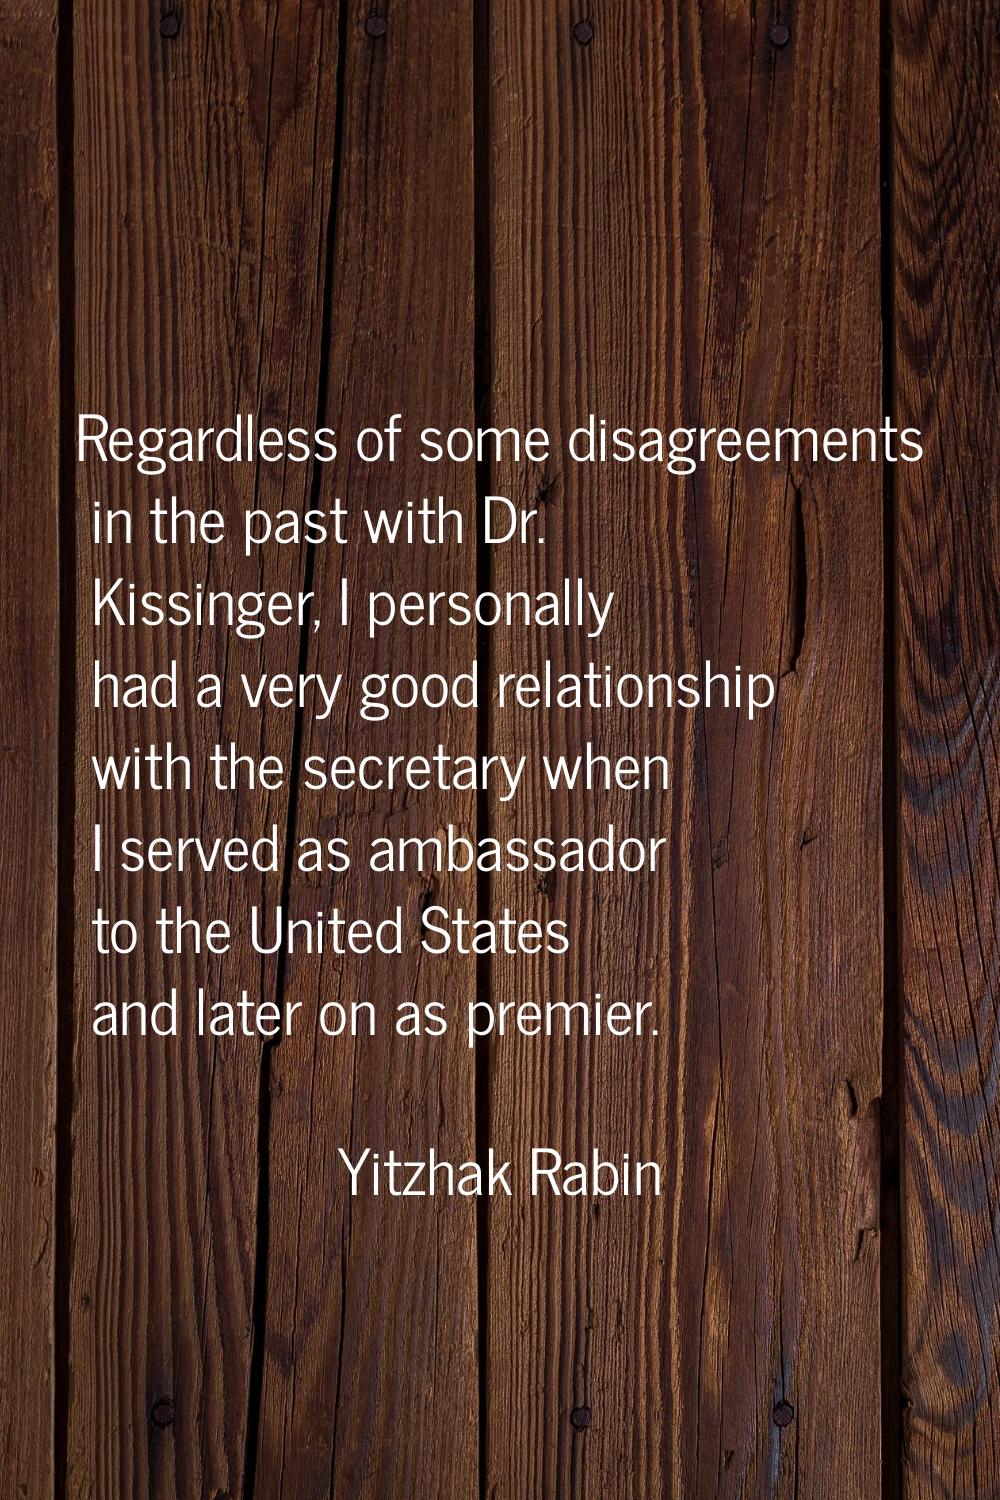 Regardless of some disagreements in the past with Dr. Kissinger, I personally had a very good relat